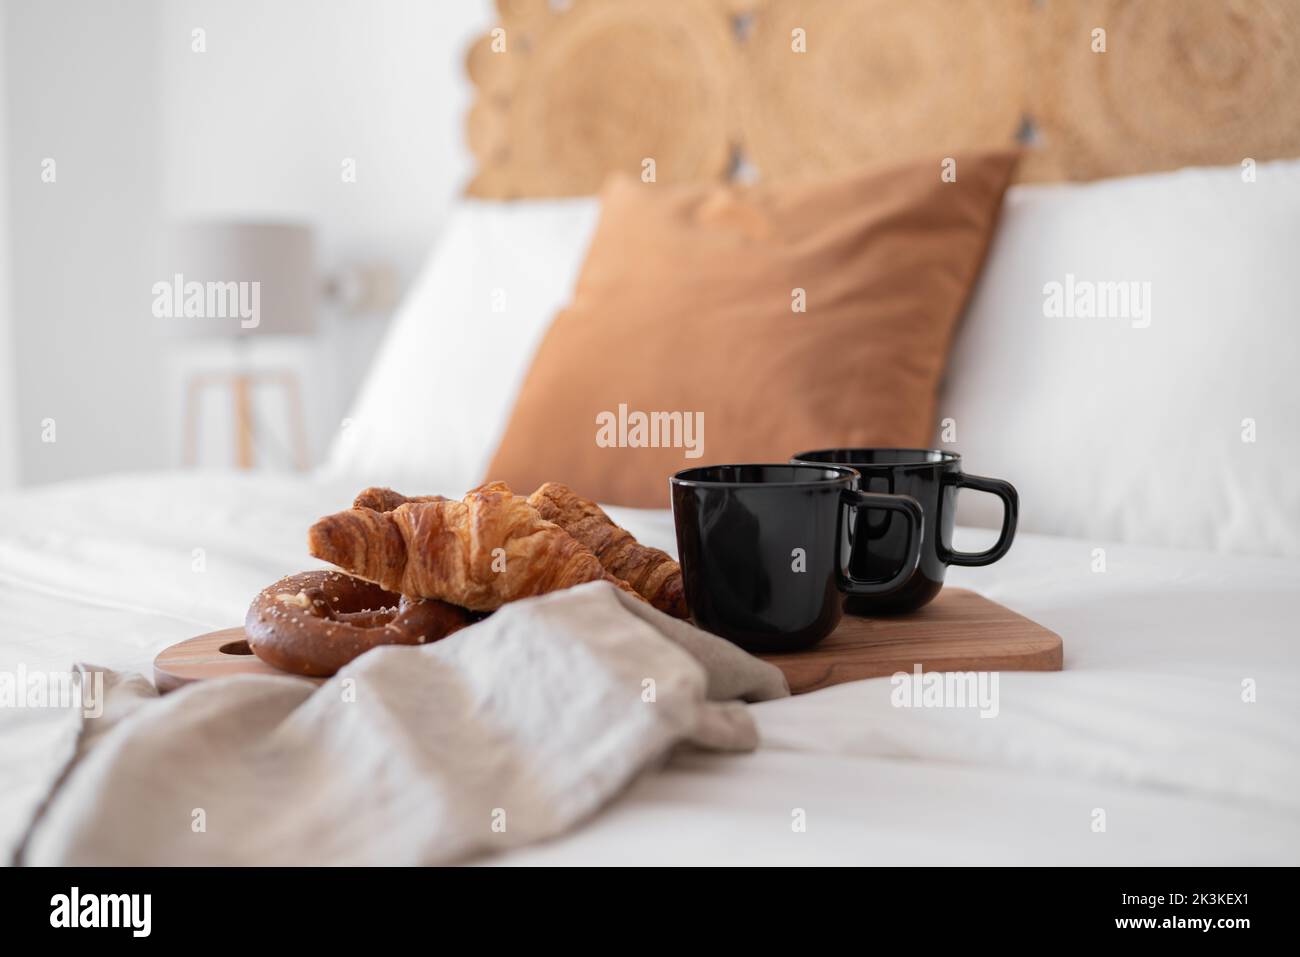 A croissant with coffee on bed in minimalistic setting Stock Photo